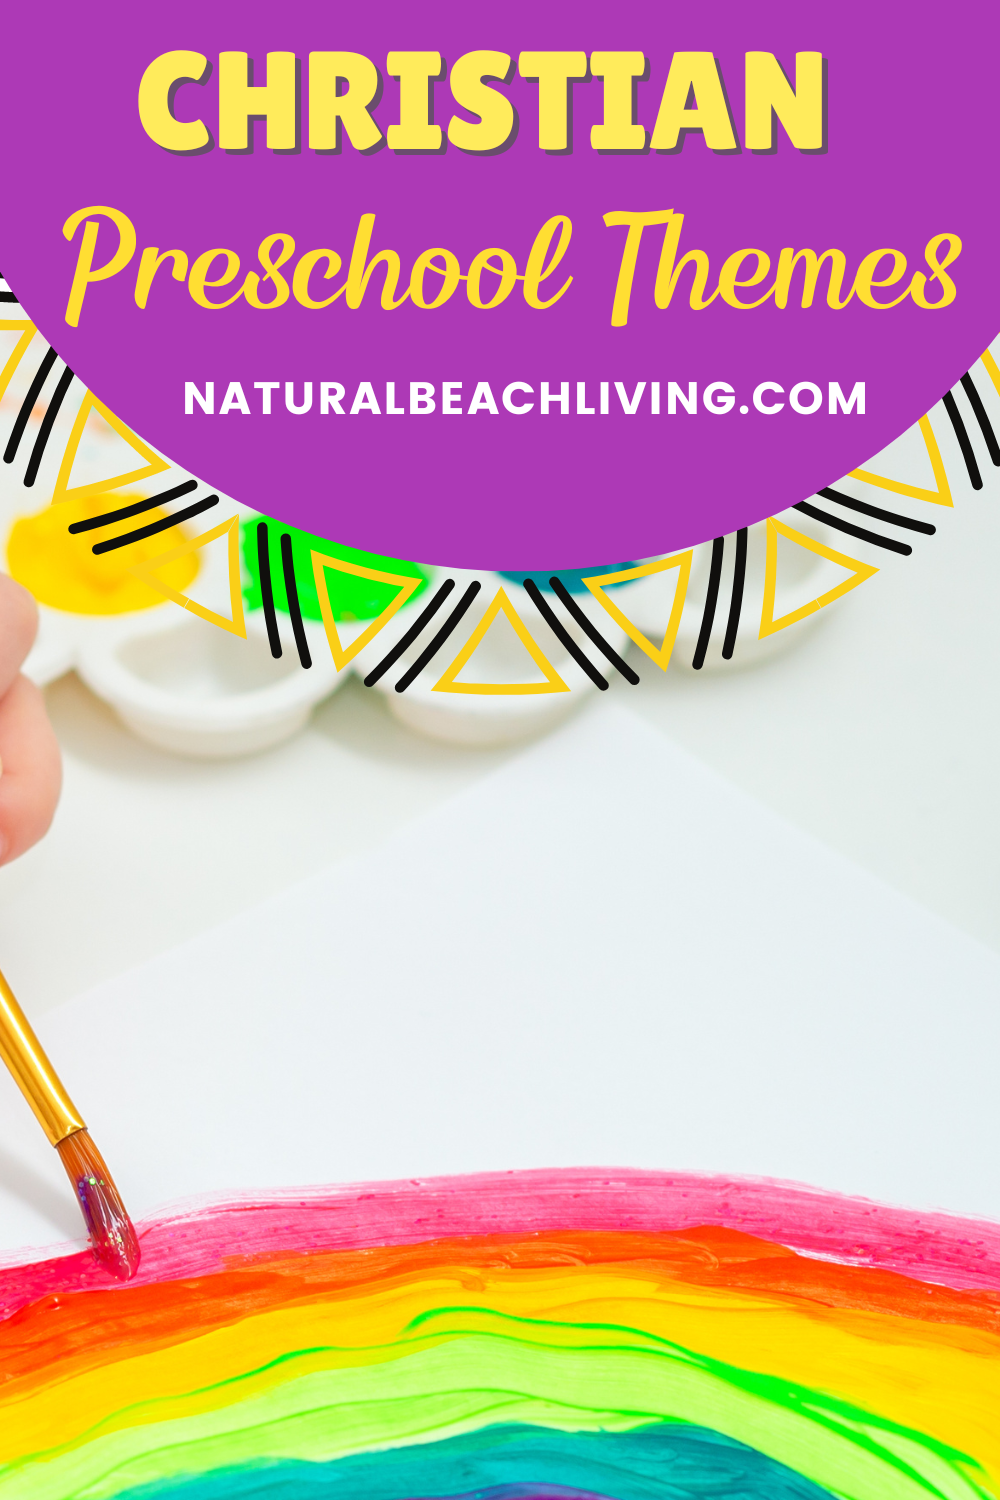 Check out the 3 Top Christian Preschool Themes, bible based preschool activities, and Christian lesson plans for your classroom, homeschooling, or Sunday school